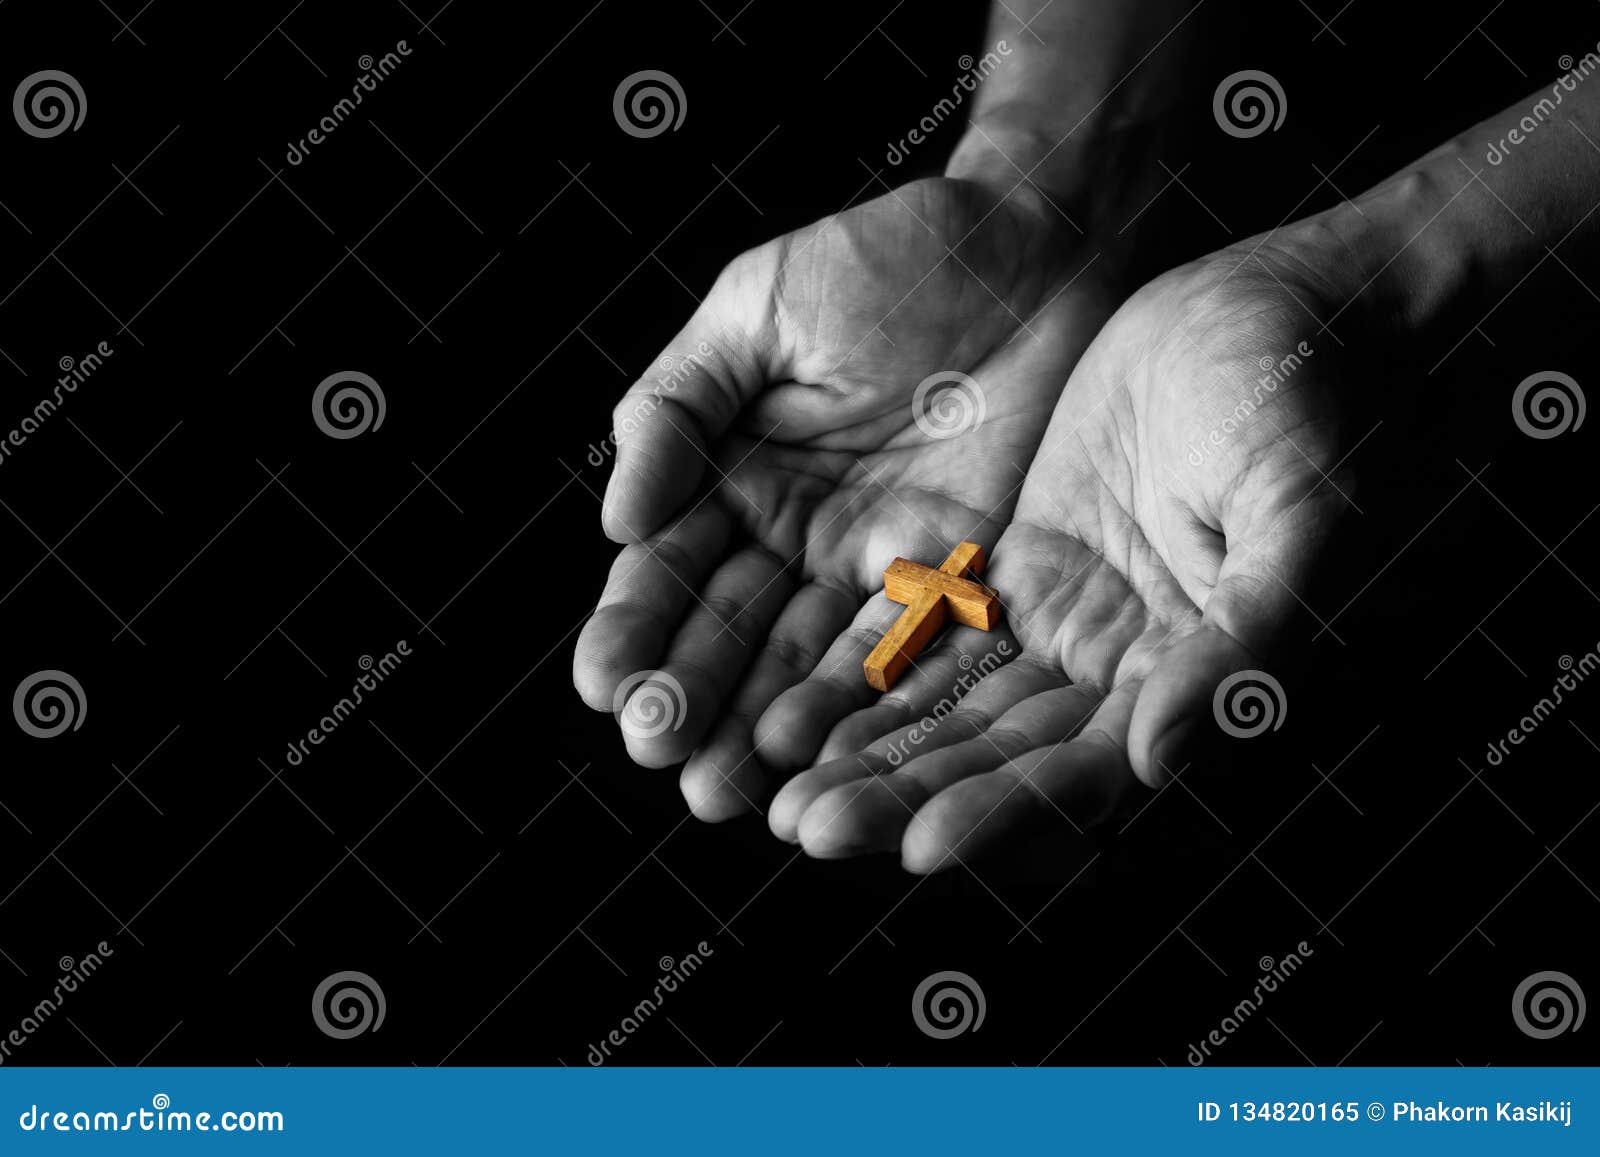 man giving simple wood cross sign. concept of evangelism jesus christ to the others